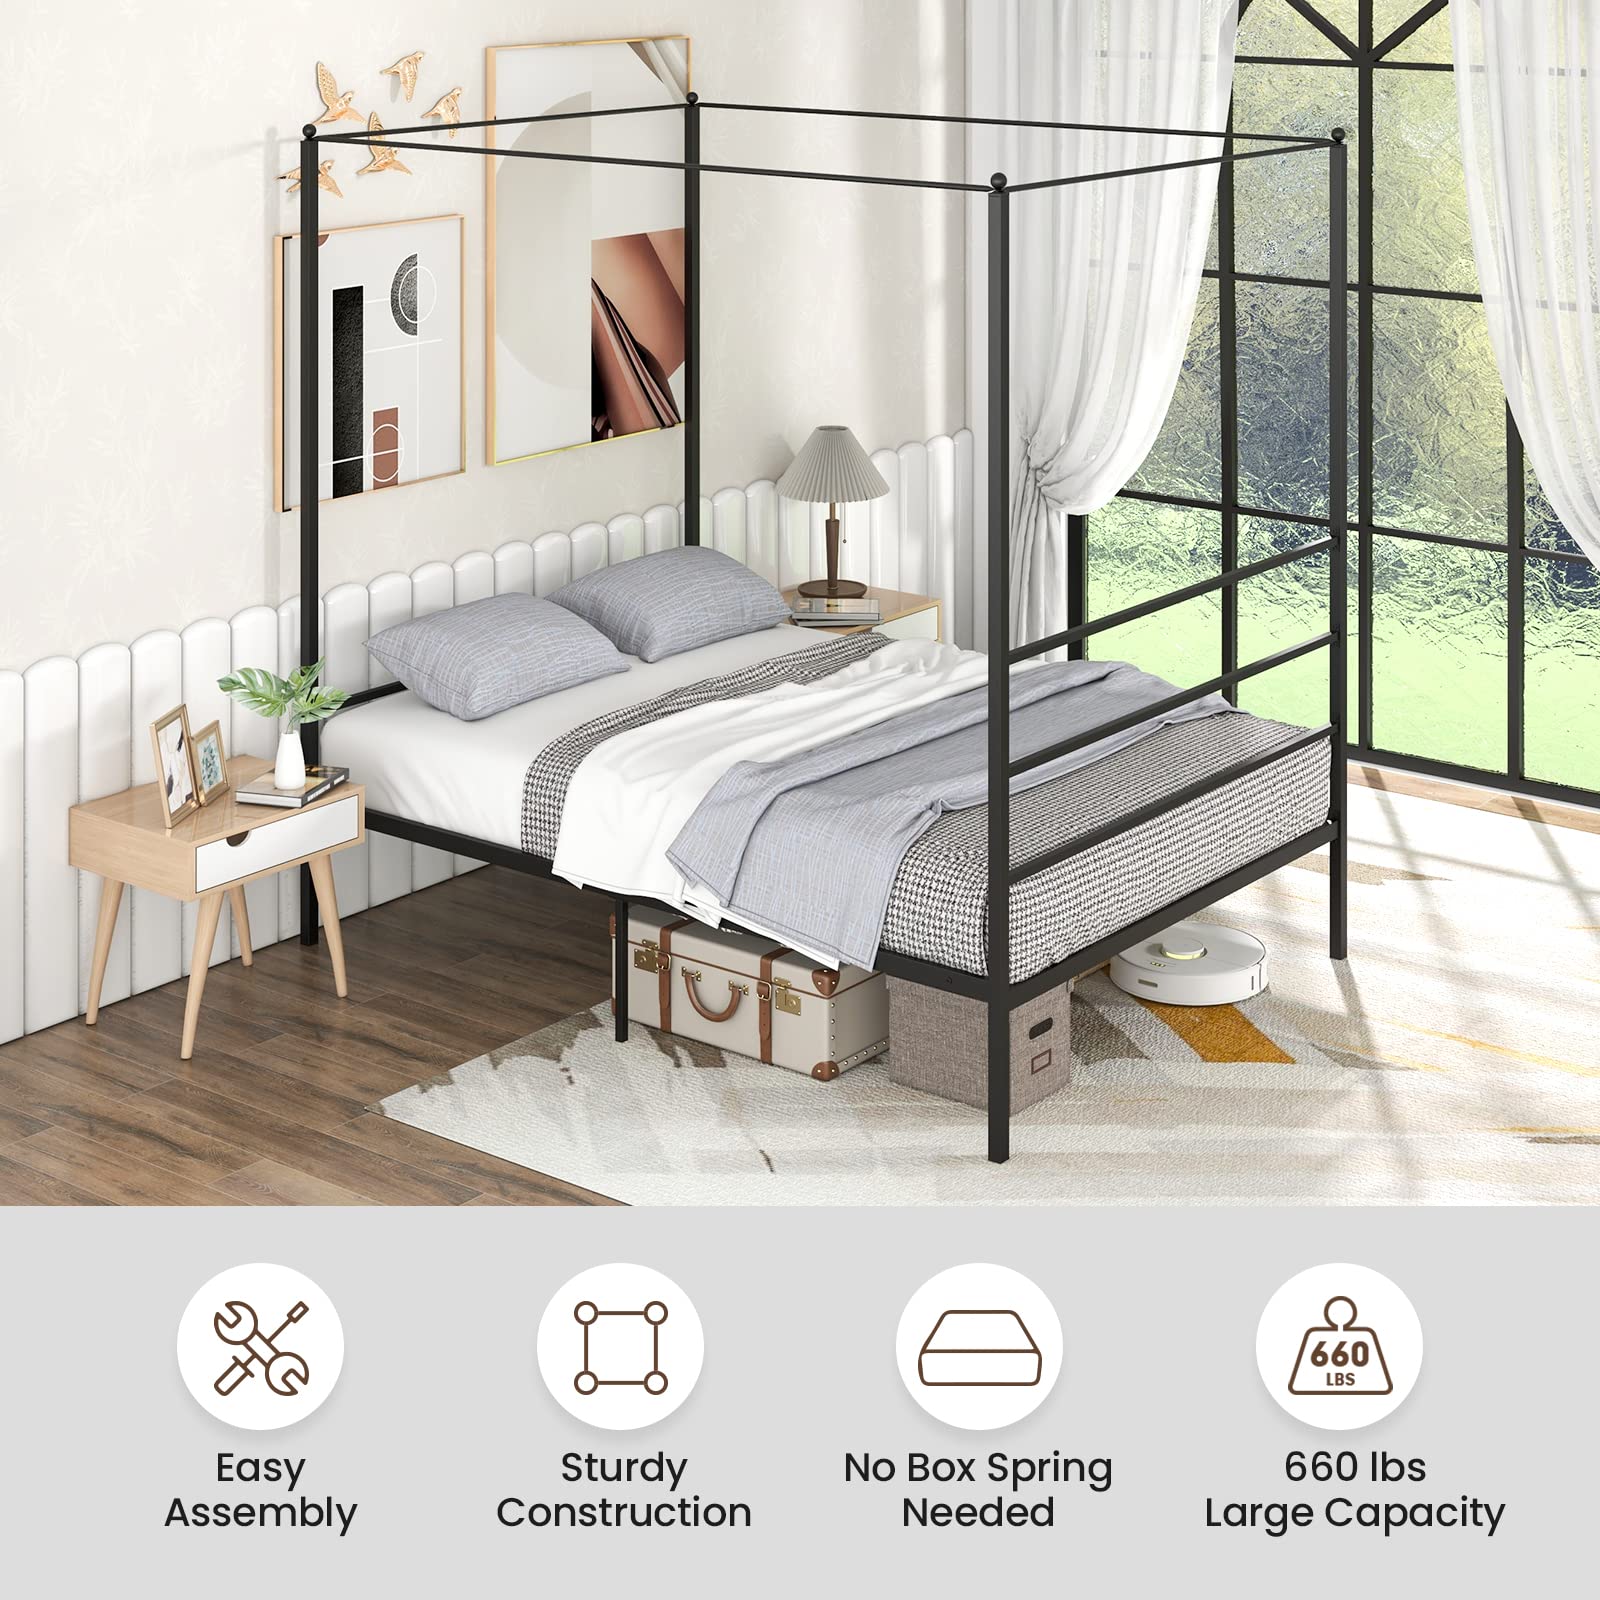 Giantex Full Size Metal Canopy Bed Frame, Modern Platform Bed Frame with 4 Poster & Headboard